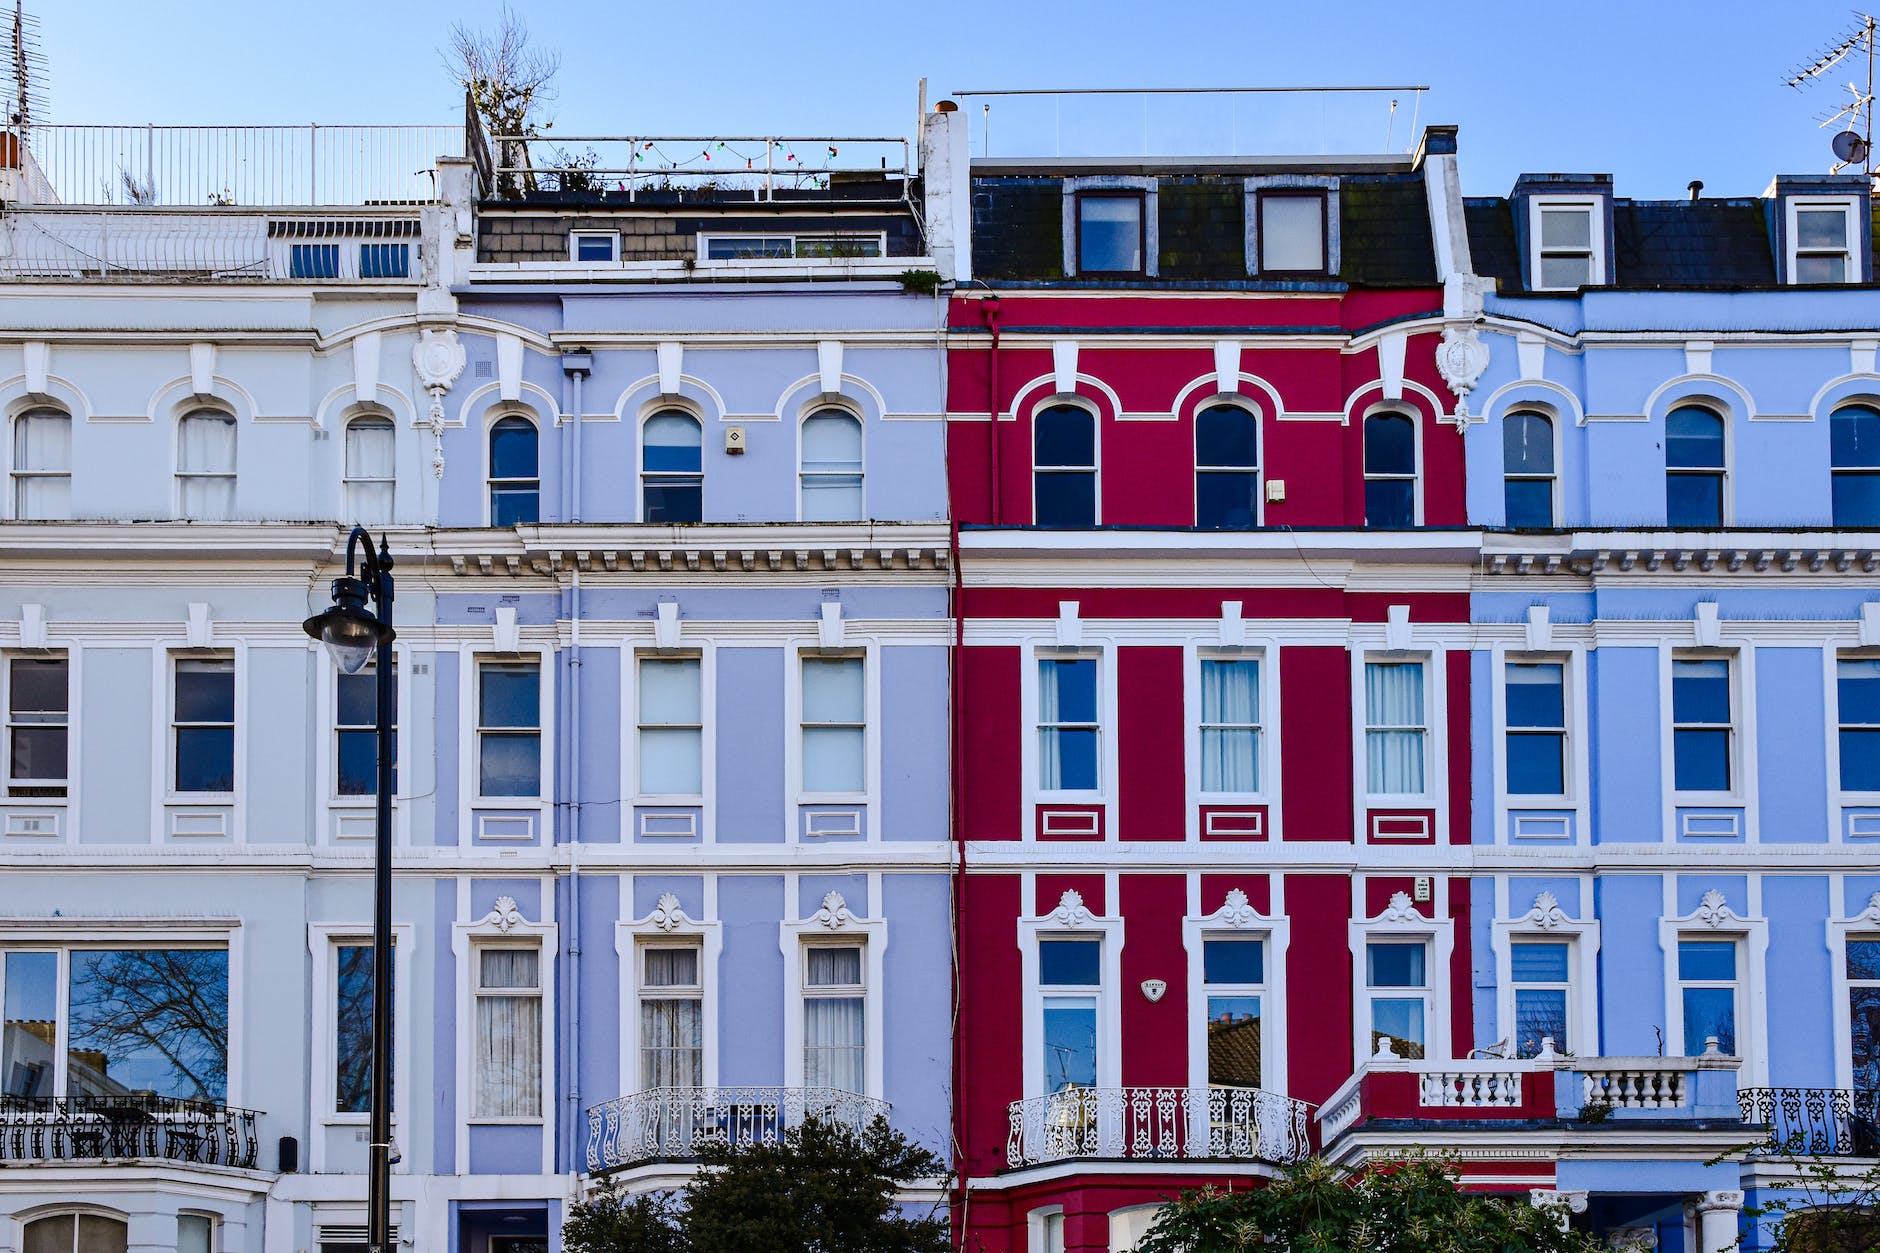 a row of colorful buildings in london